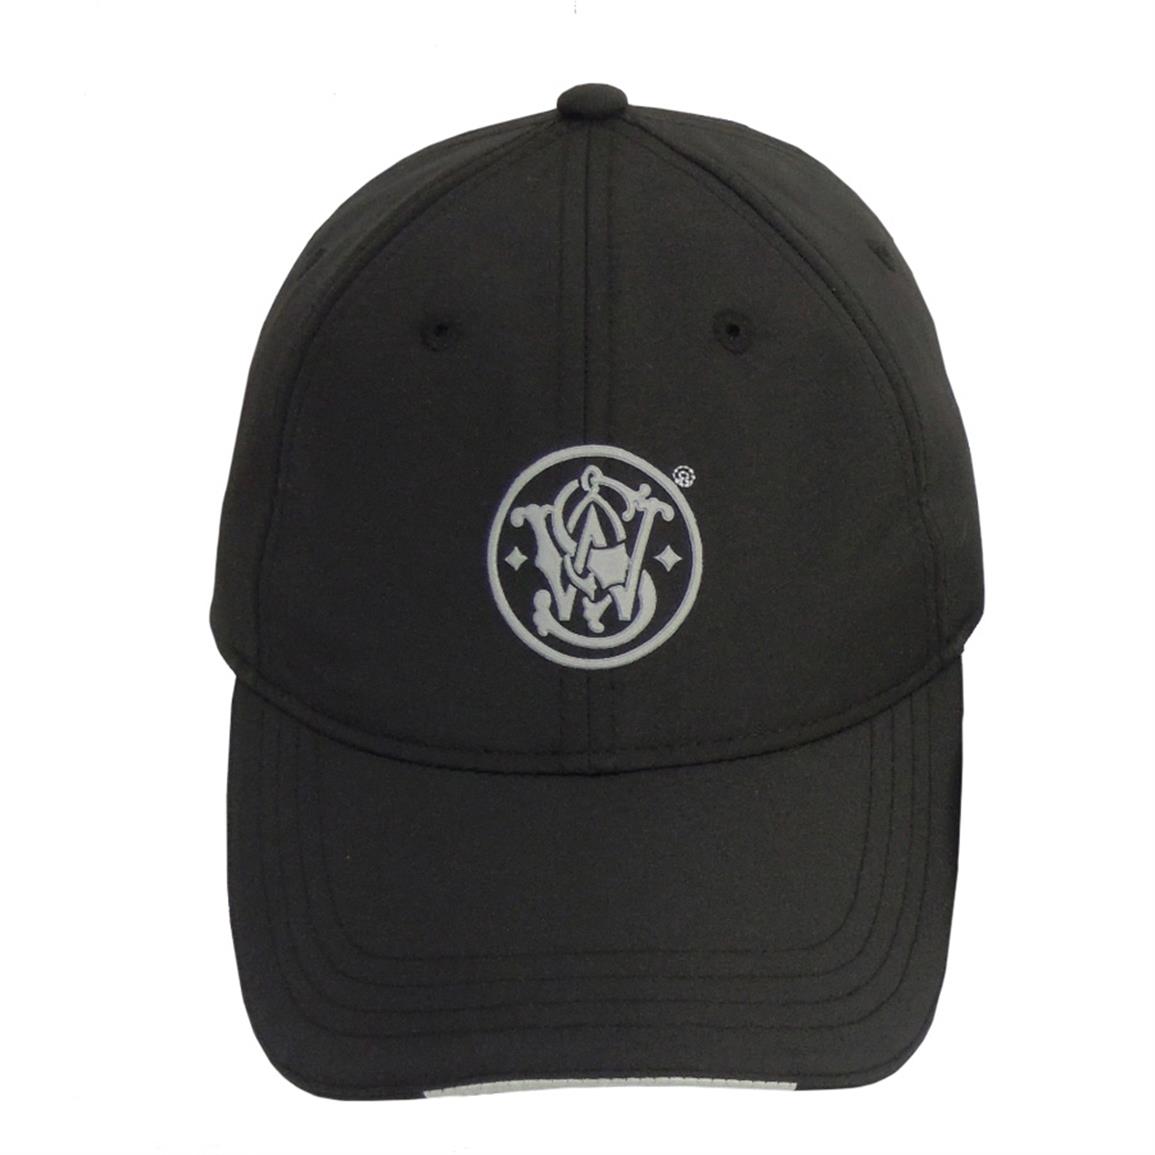 Smith & Wesson Logo Hat - 660528, Hats & Caps at Sportsman's Guide